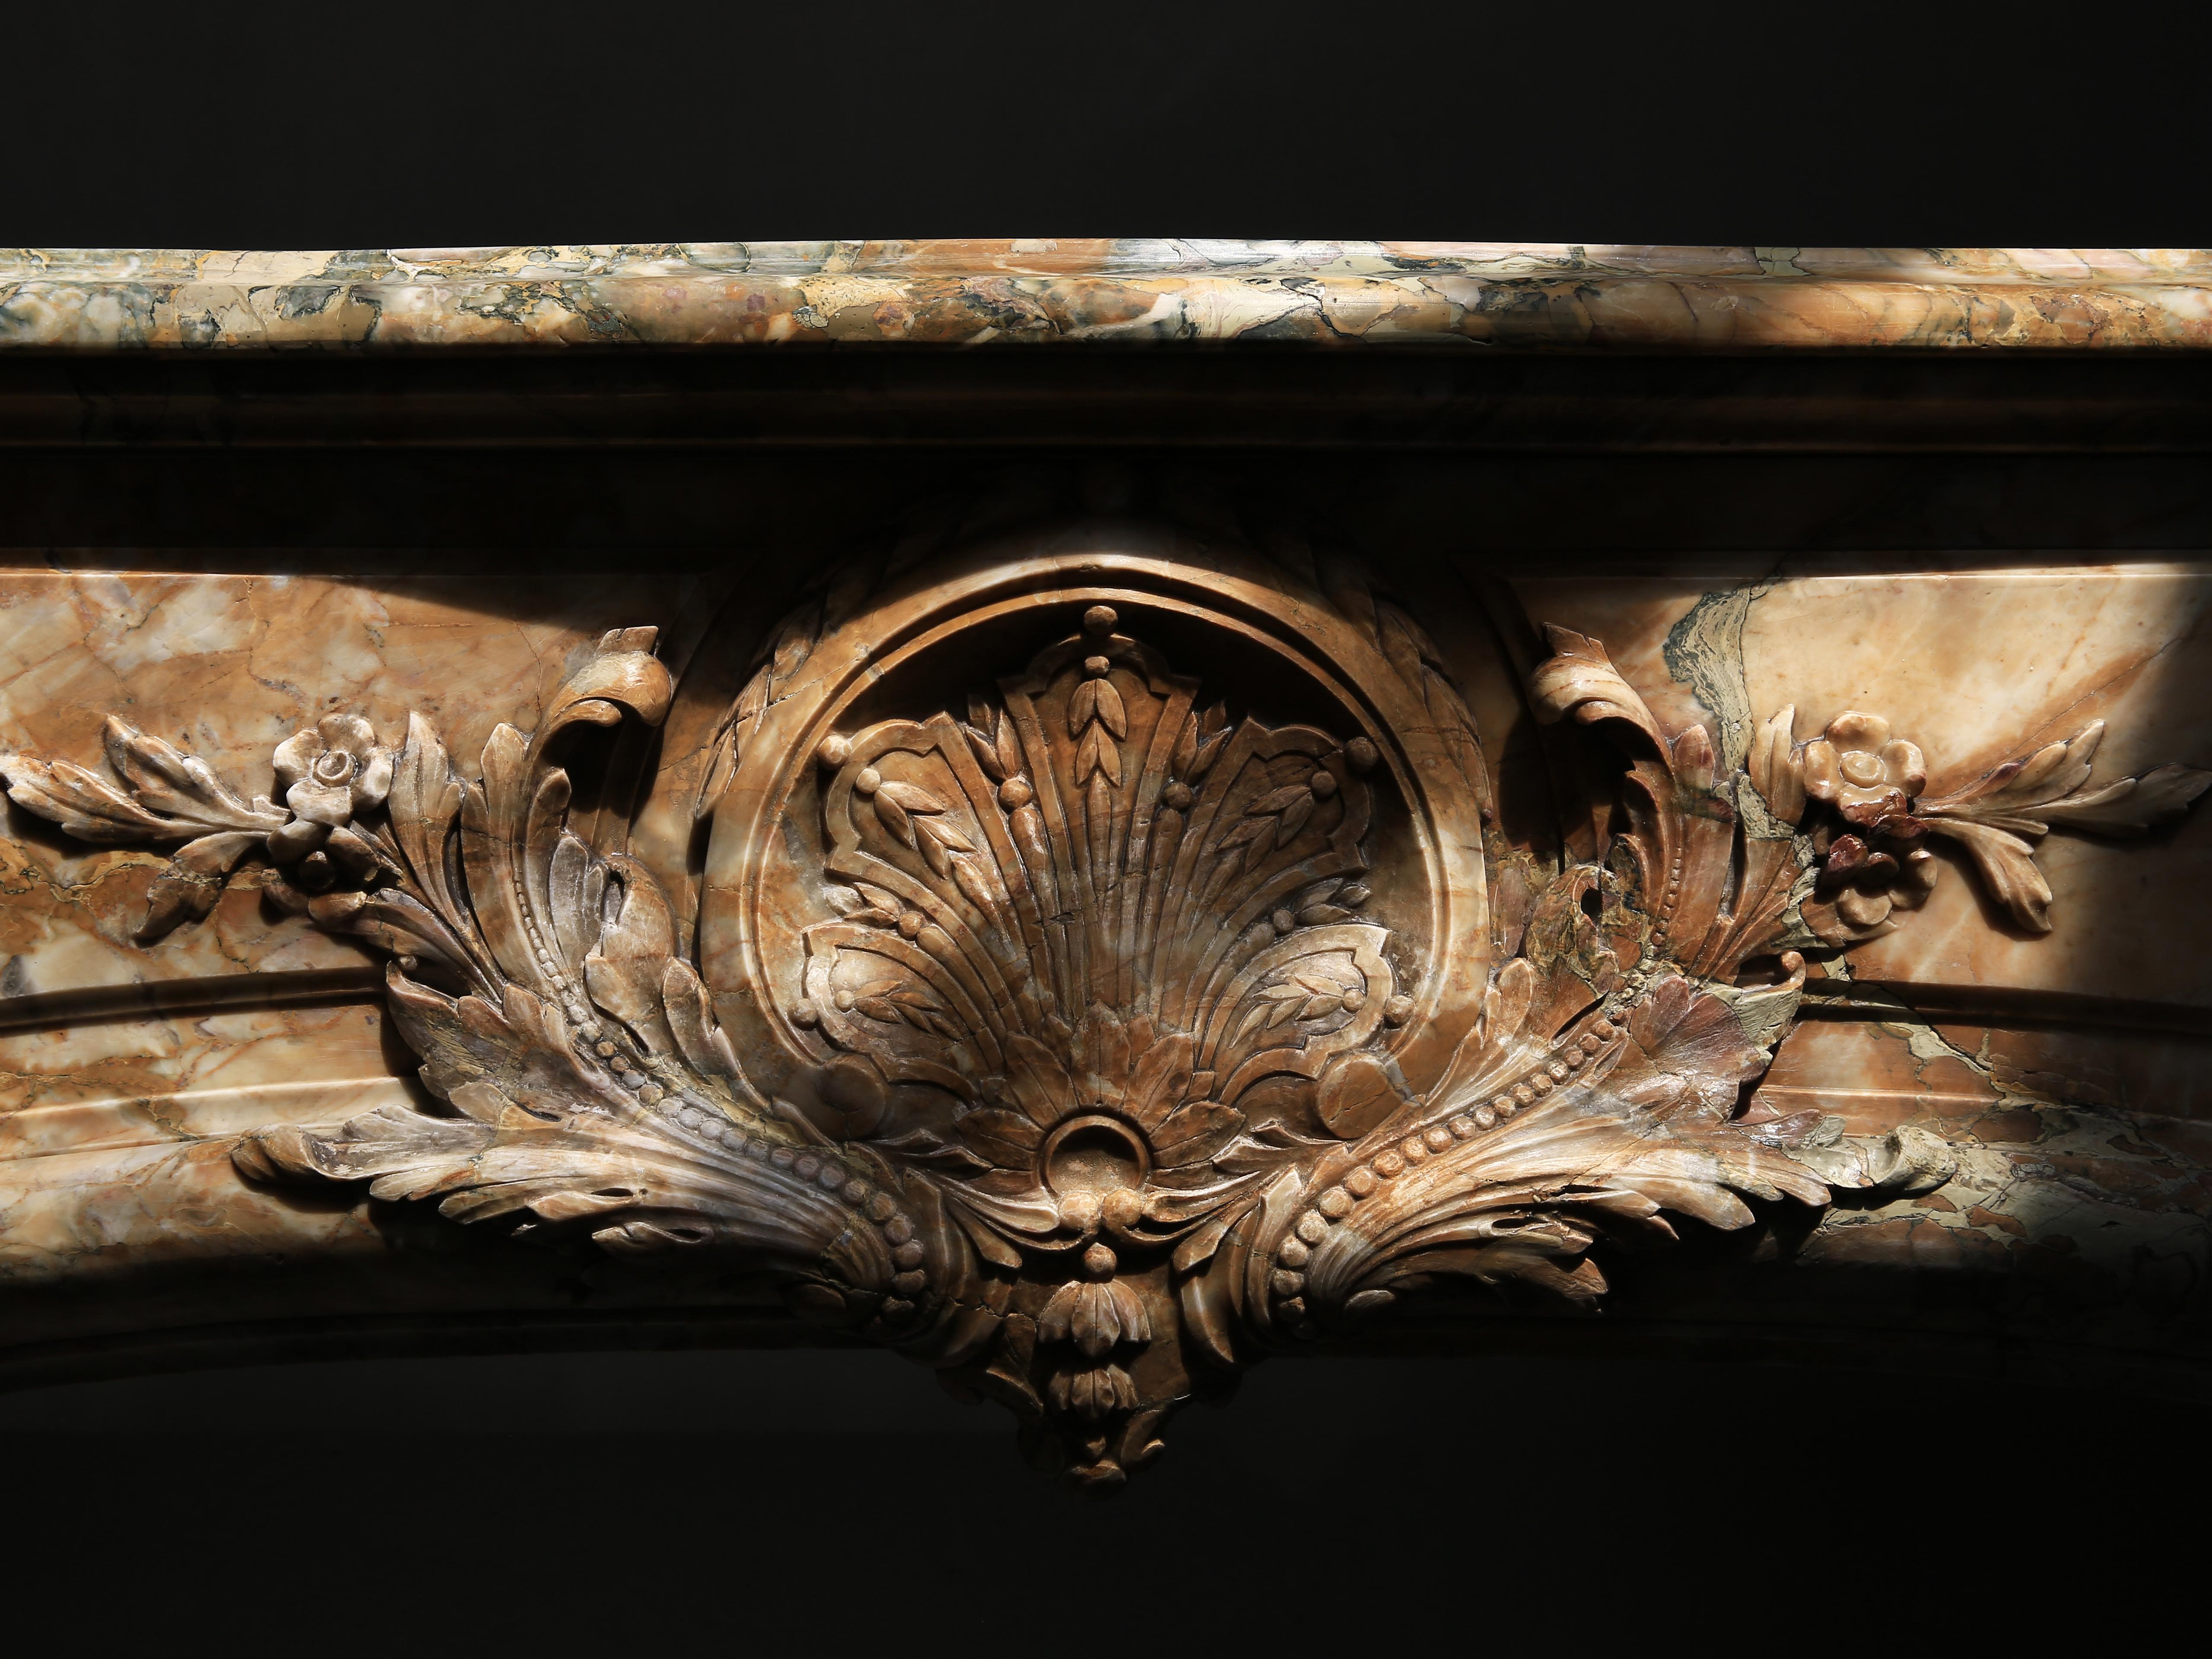 Beautiful antique fireplace of Brocatelle de Sienna marble, circa 1830-1850! This mantel is in the style of Louis XIV Boudin and comes from a Classic apartment in Paris. The mantel (fireplace) is richly sculpted with ornaments and embellishments